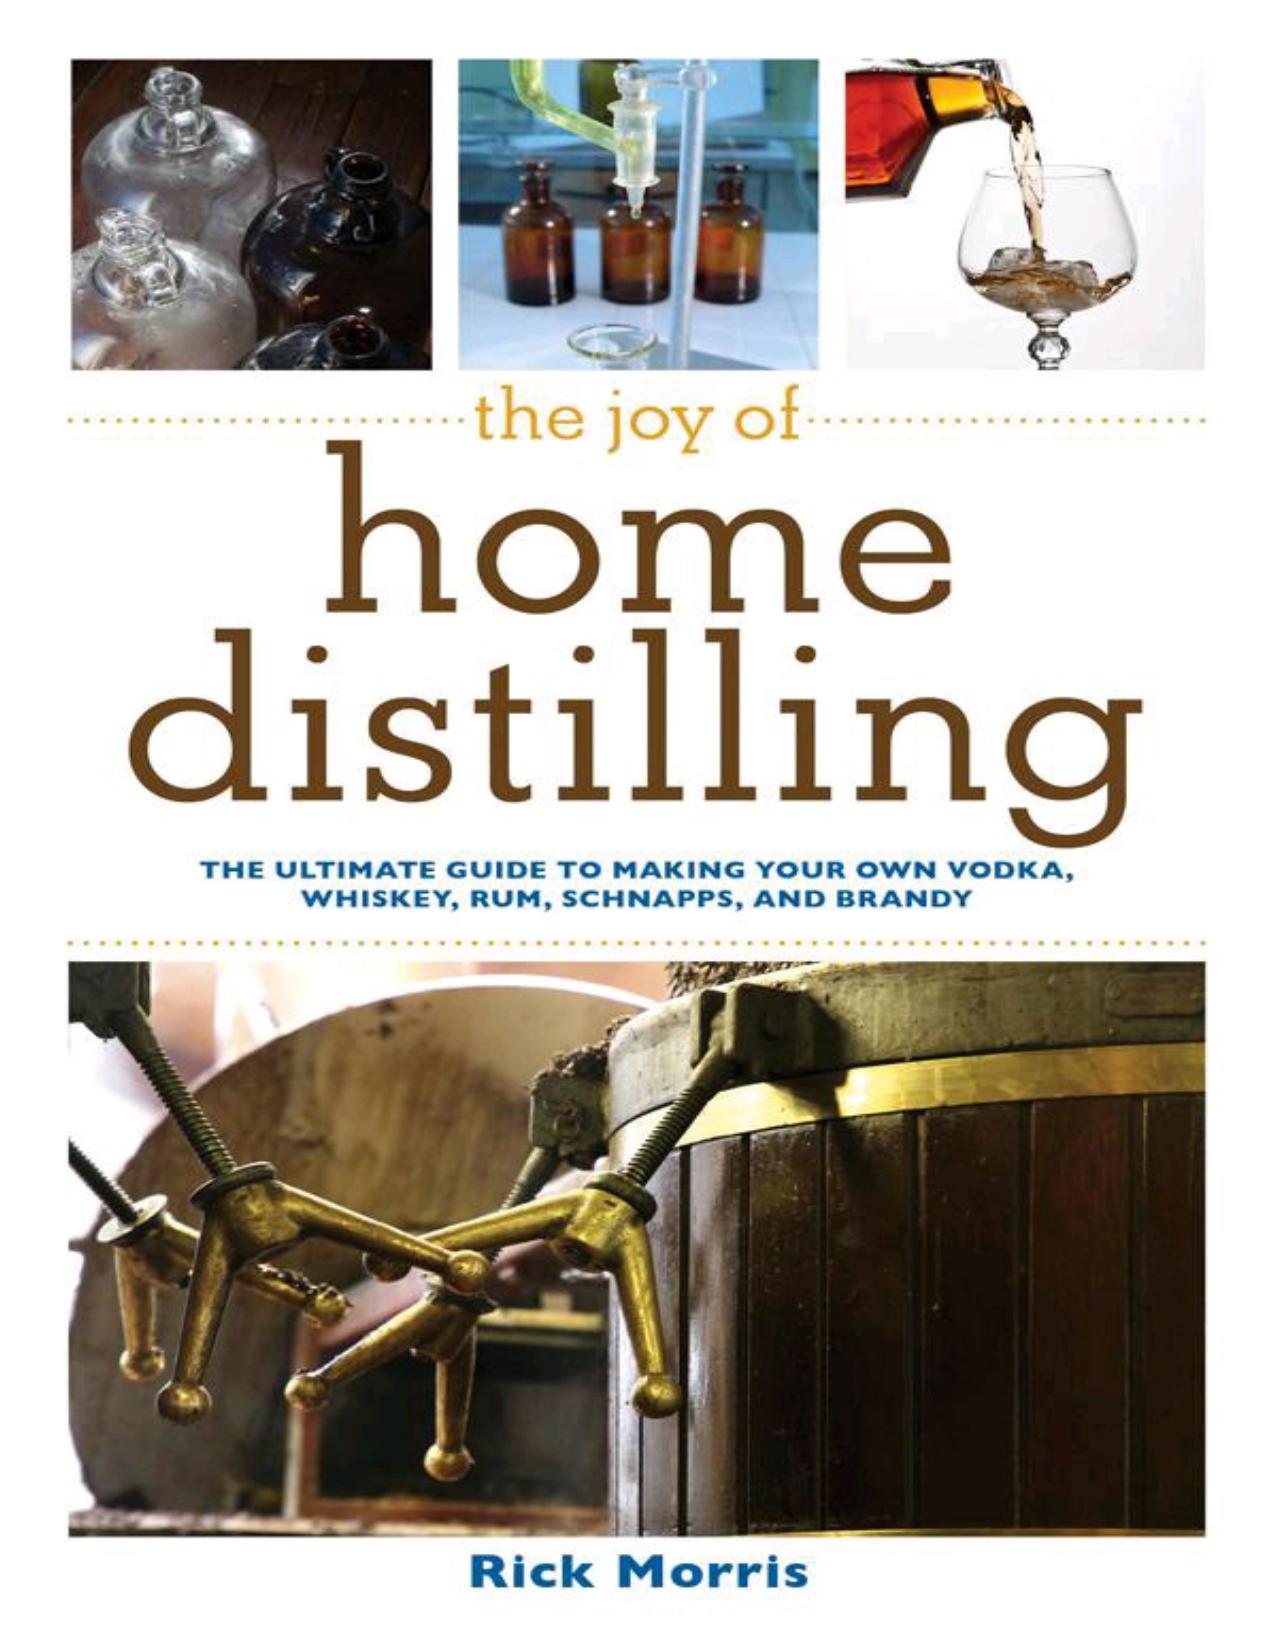 The Joy of Home Distilling by Rick Morris